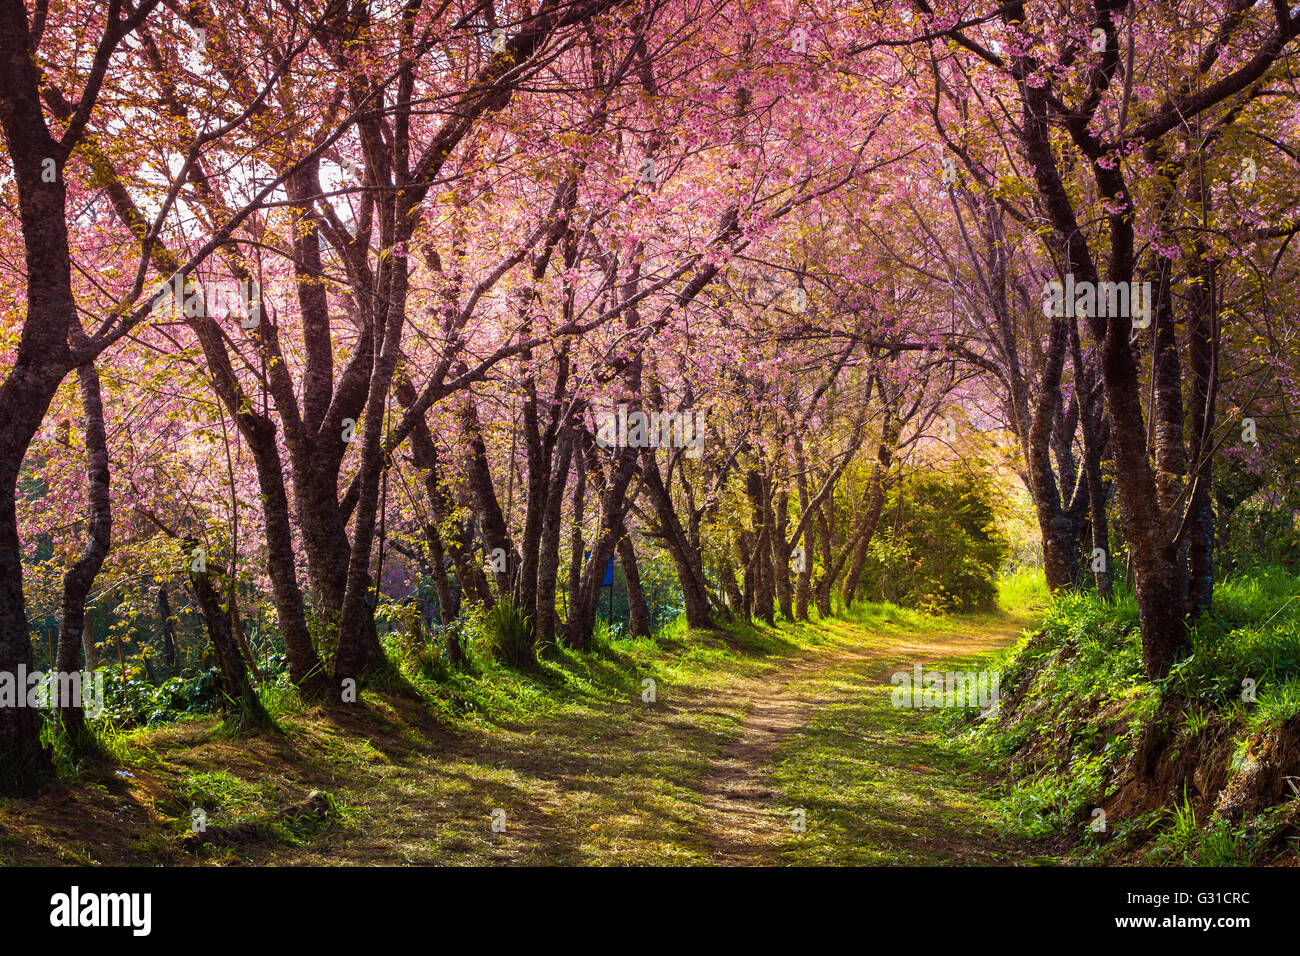 cherry blossom pink sakura in Thailand with colorful leaves and a footpath leading into the scene Stock Photo